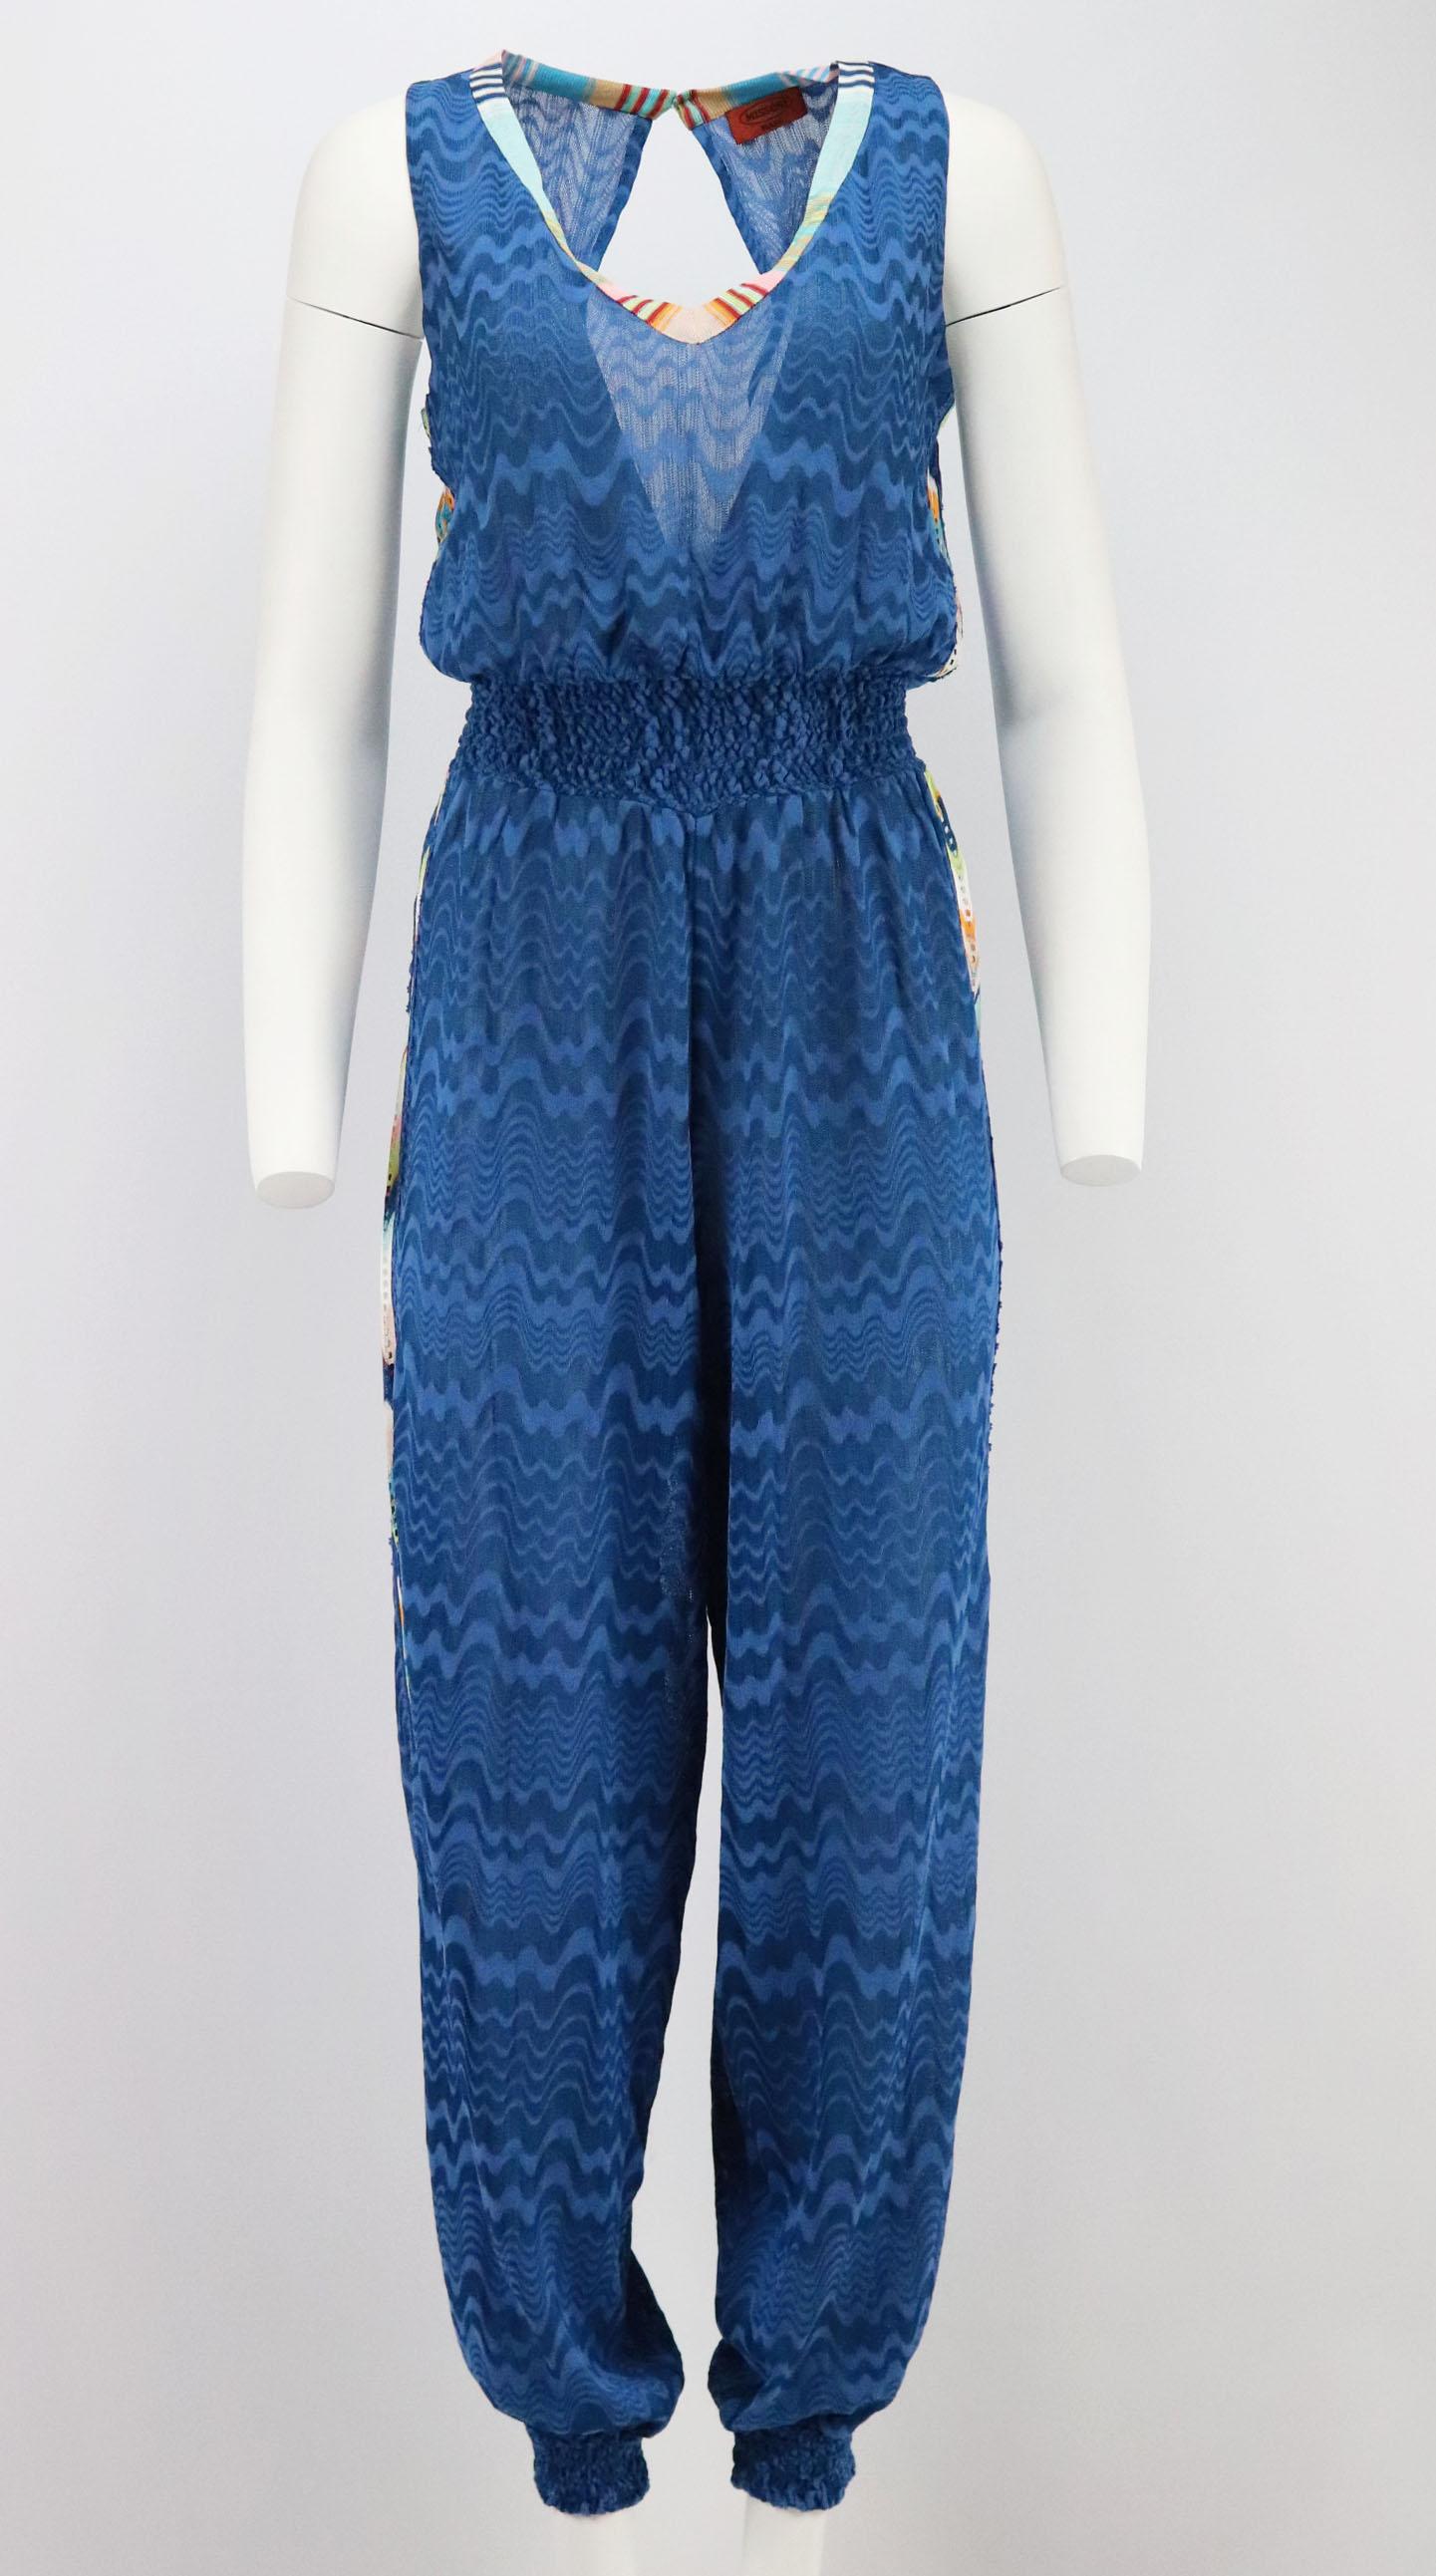 Missoni Mare's jumpsuit has been made in Italy from the brand's signature crochet-knit and is patterned with colourful stripes down the sides, it's designed with a elasticated cinched in waist that will frame your silhouette.
Blue